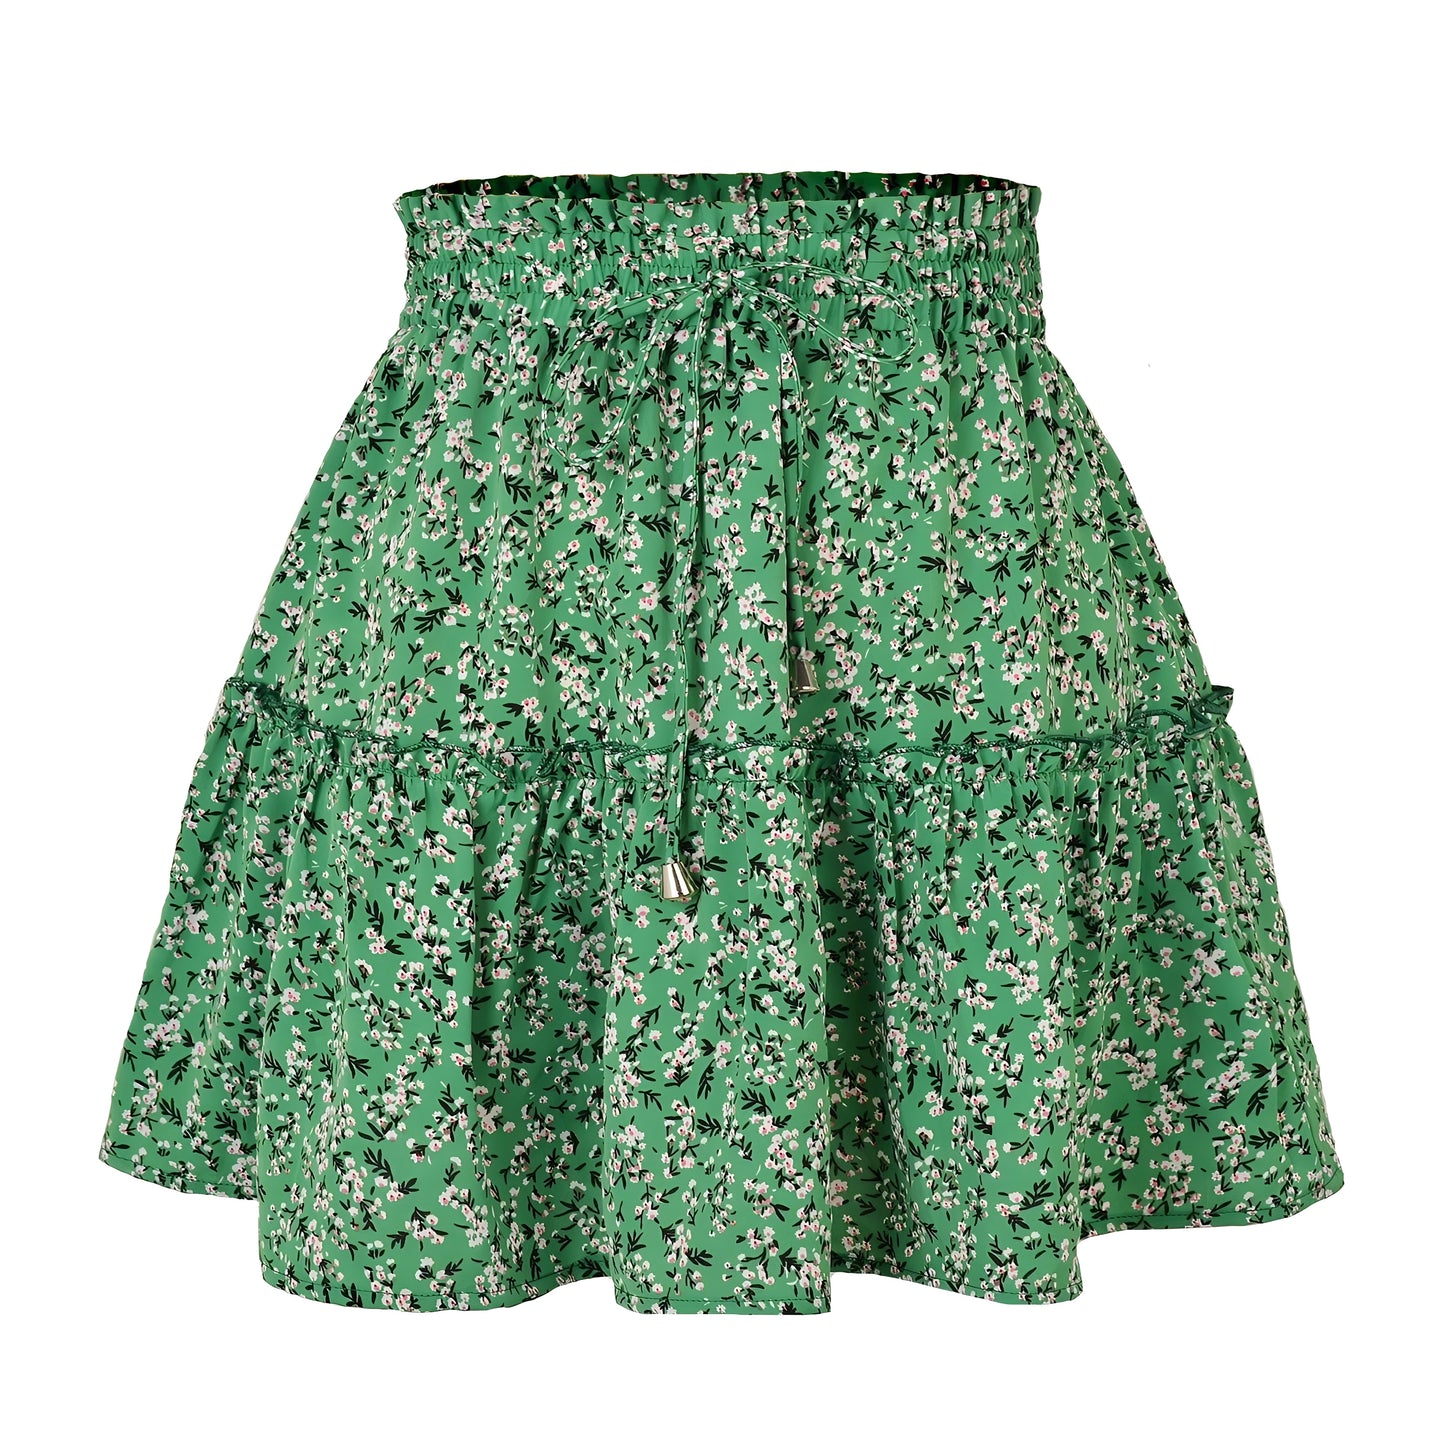 floral-print-green-and-white-daisy-flower-patterned-layered-ruffle-trim-draw-string-tie-fitted-waist-smocked-mid-high-rise-waisted-flowy-boho-tullie-linen-tiered-short-mini-skirt-women-ladies-chic-trendy-spring-2024-summer-elegant-casual-feminine-preppy-style-zara-altard-state-urban-outfitters-brandy-melville-princess-polly